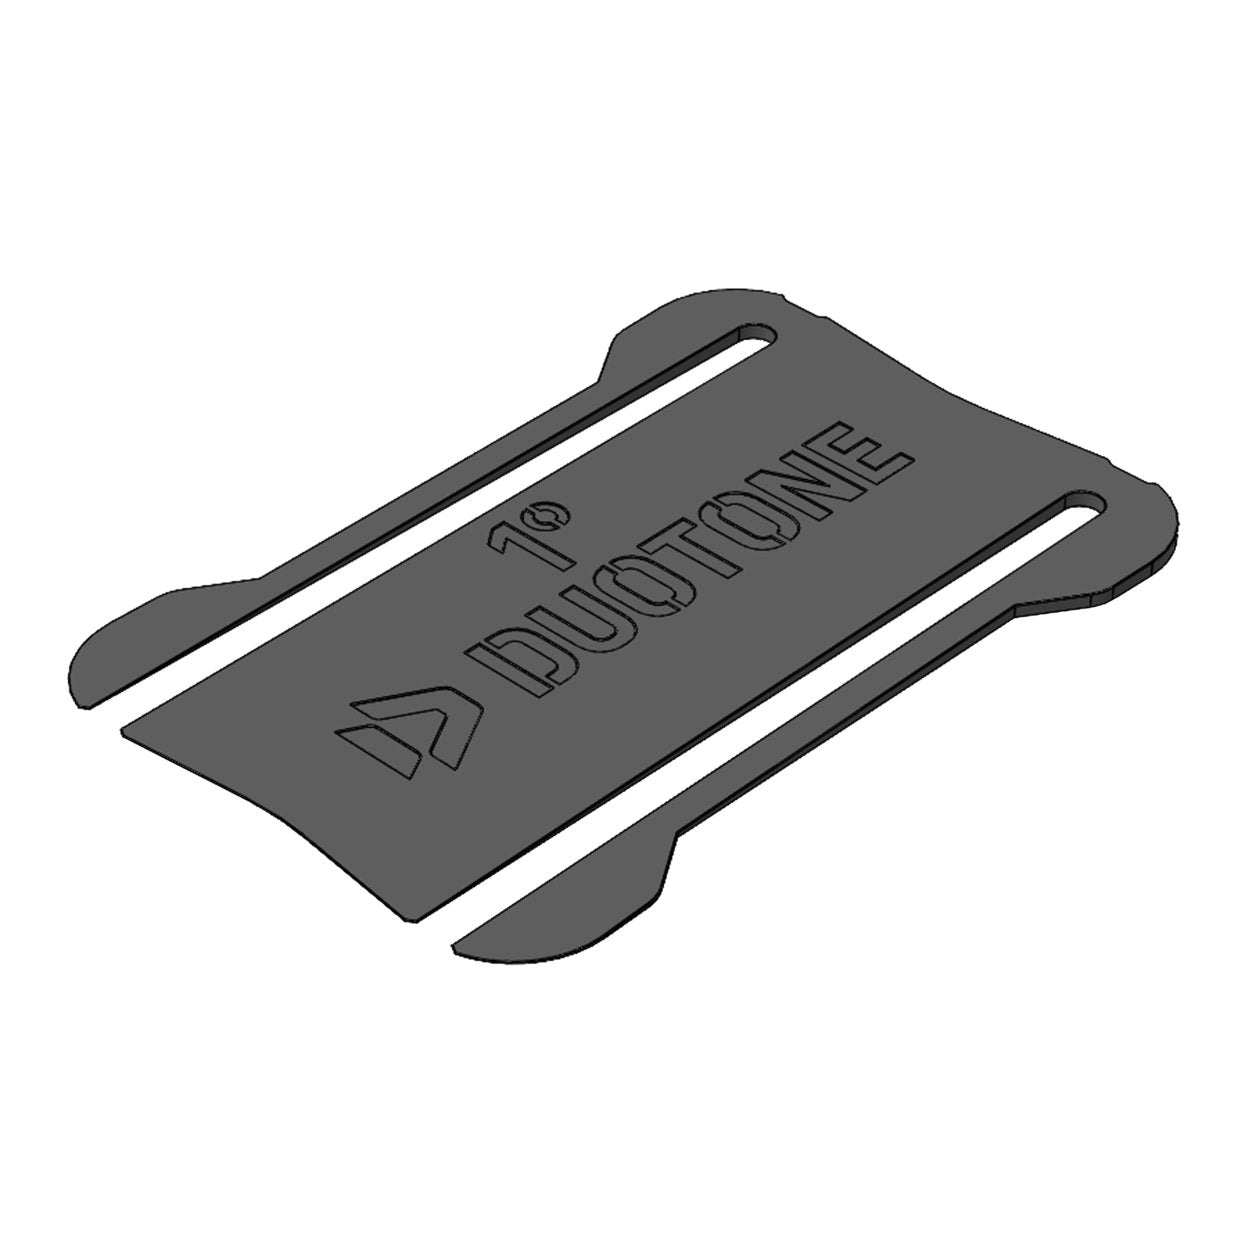 Duotone Foil Spare Plate Shim 2024 - Worthing Watersports - 9010583196275 - DT Spareparts - Duotone X